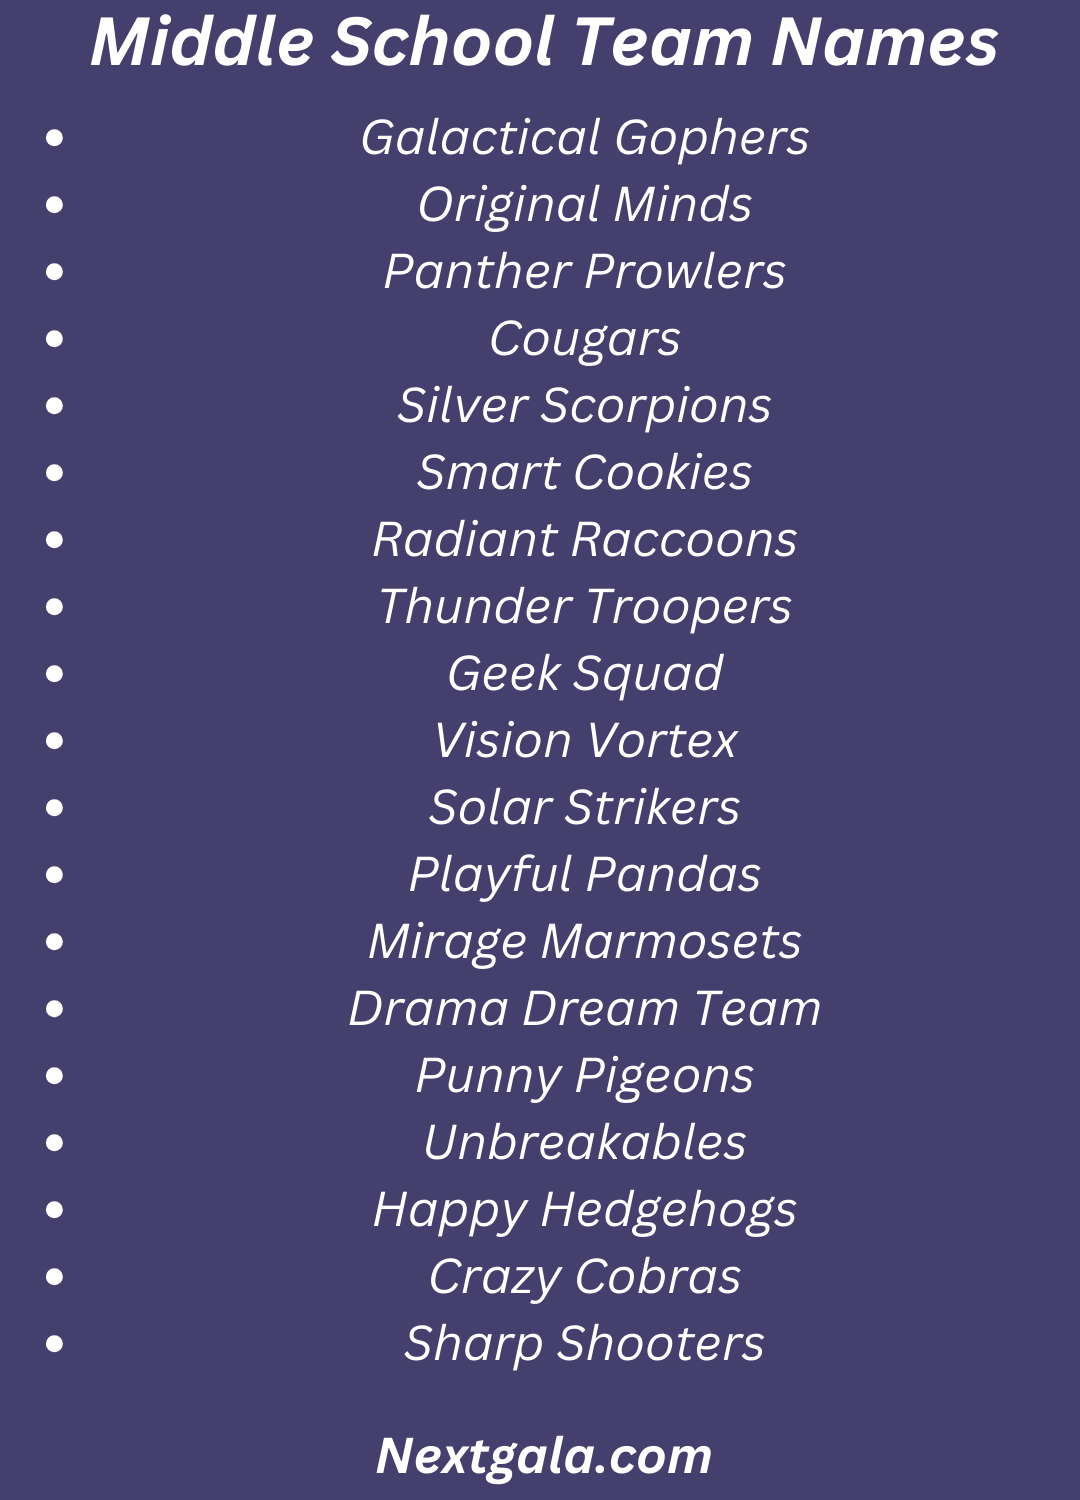 Middle School Team Names